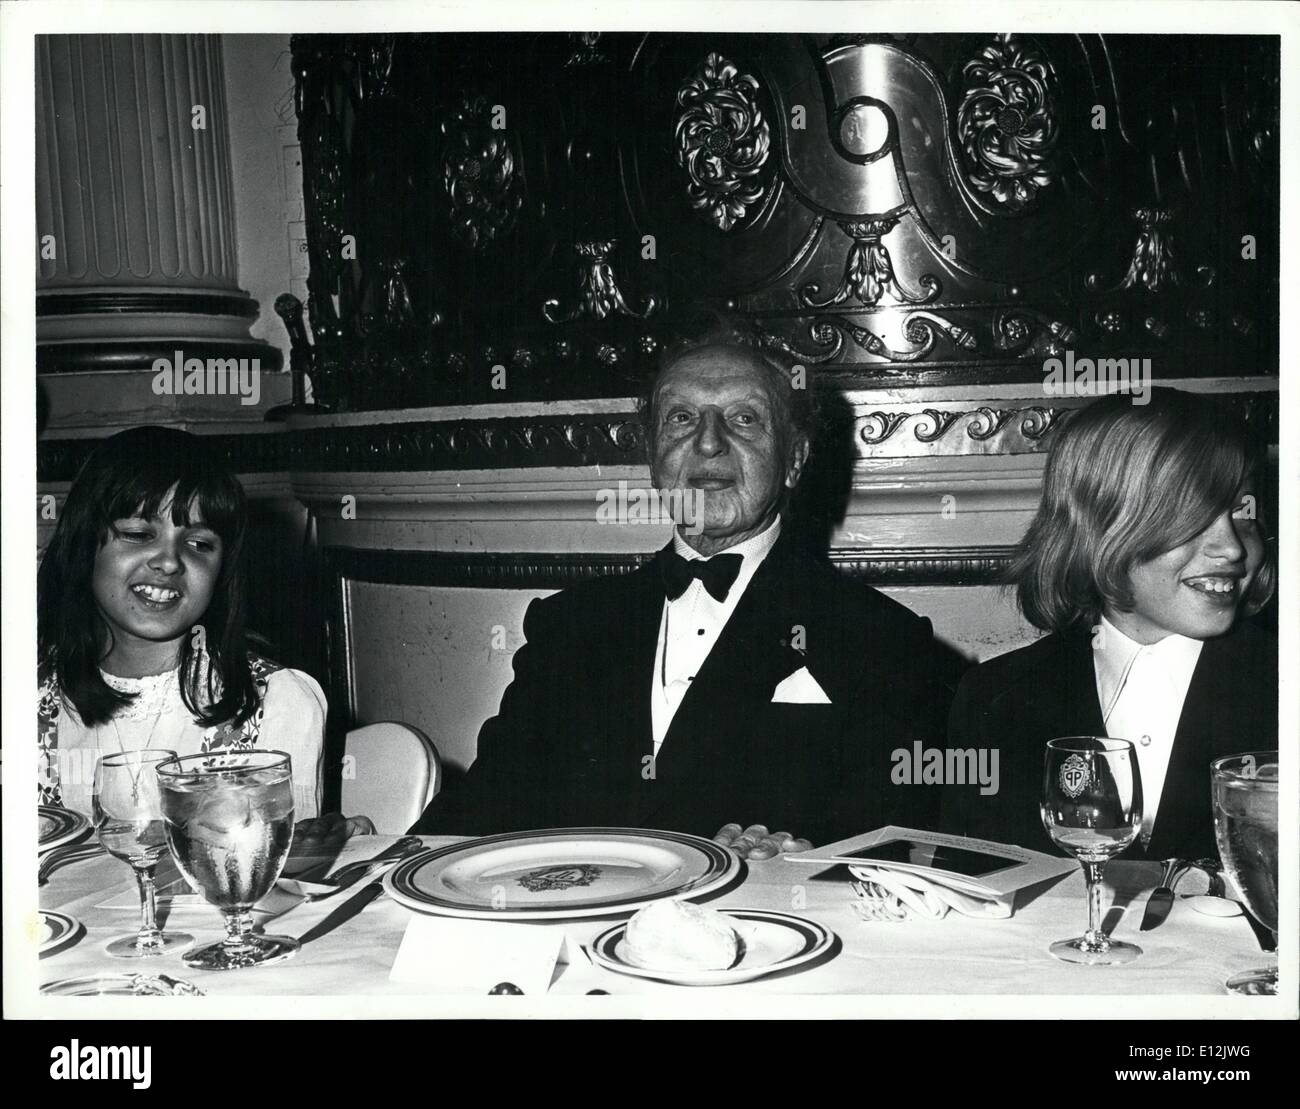 Feb. 24, 2012 - Leopold Stokowski 90th birthday, Hotel Plaza with two of his granddaughters. Stock Photo